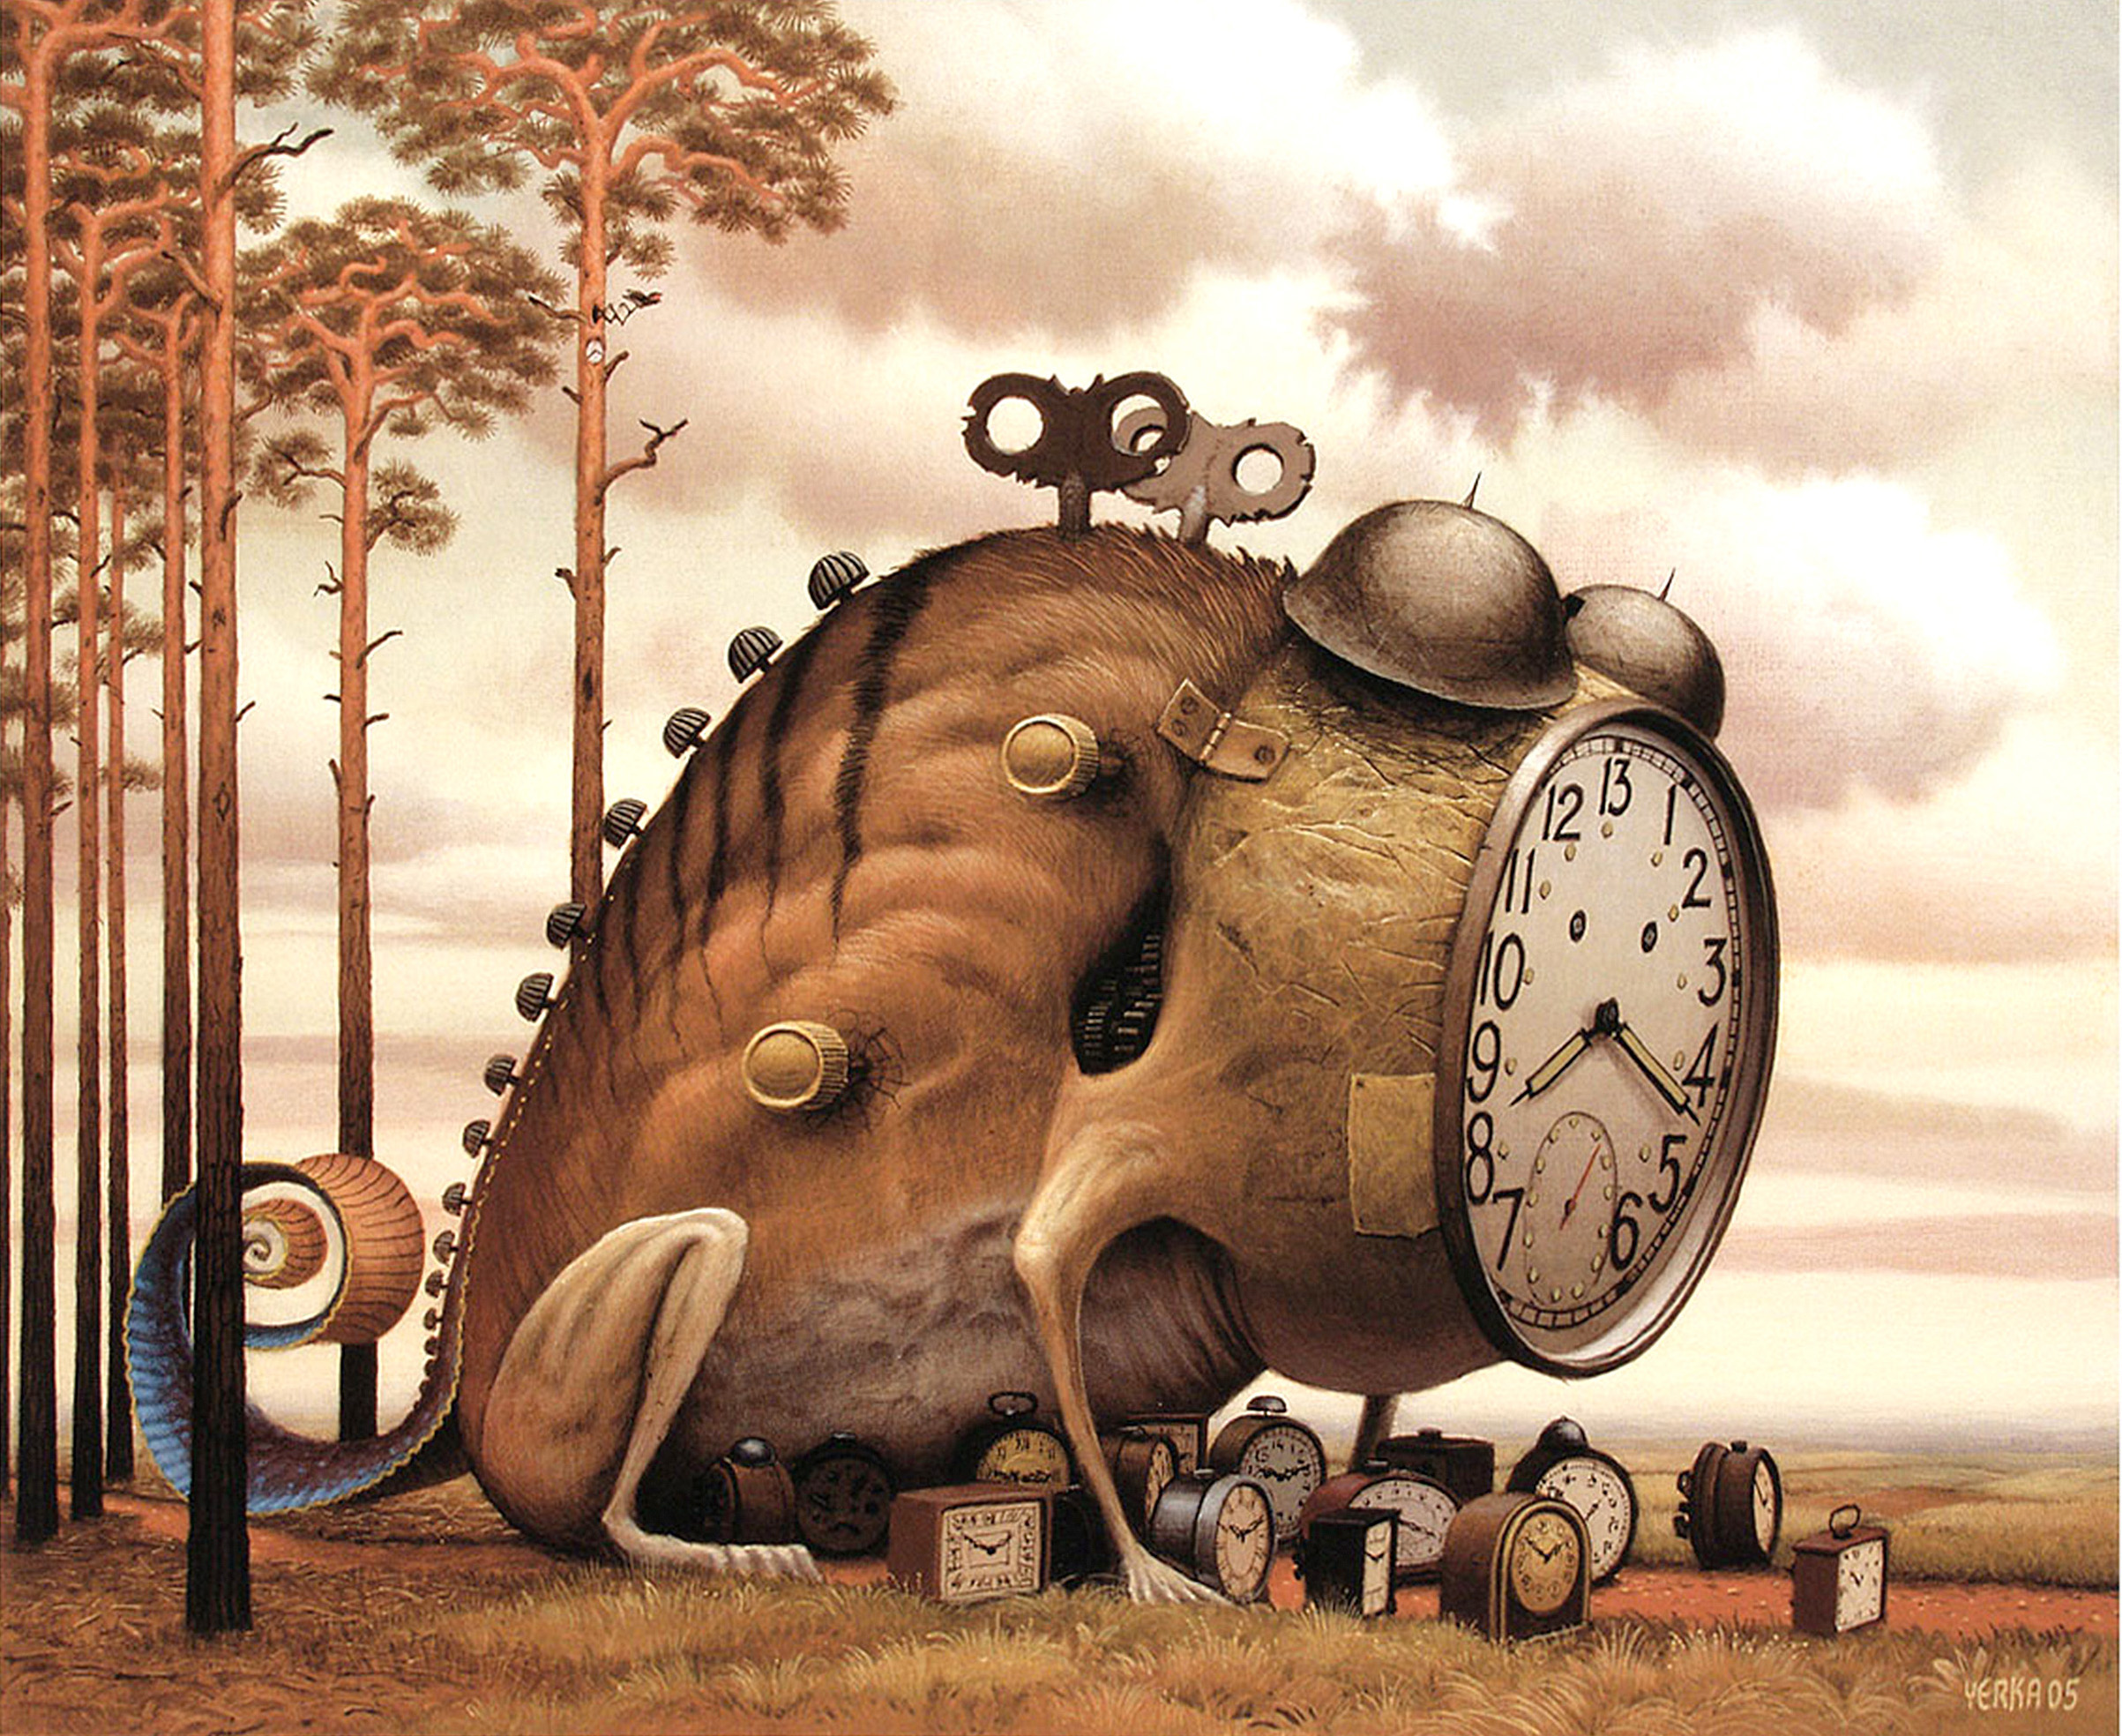 Surreal forest scene with a cloud-filled path, a creature, and a clock.